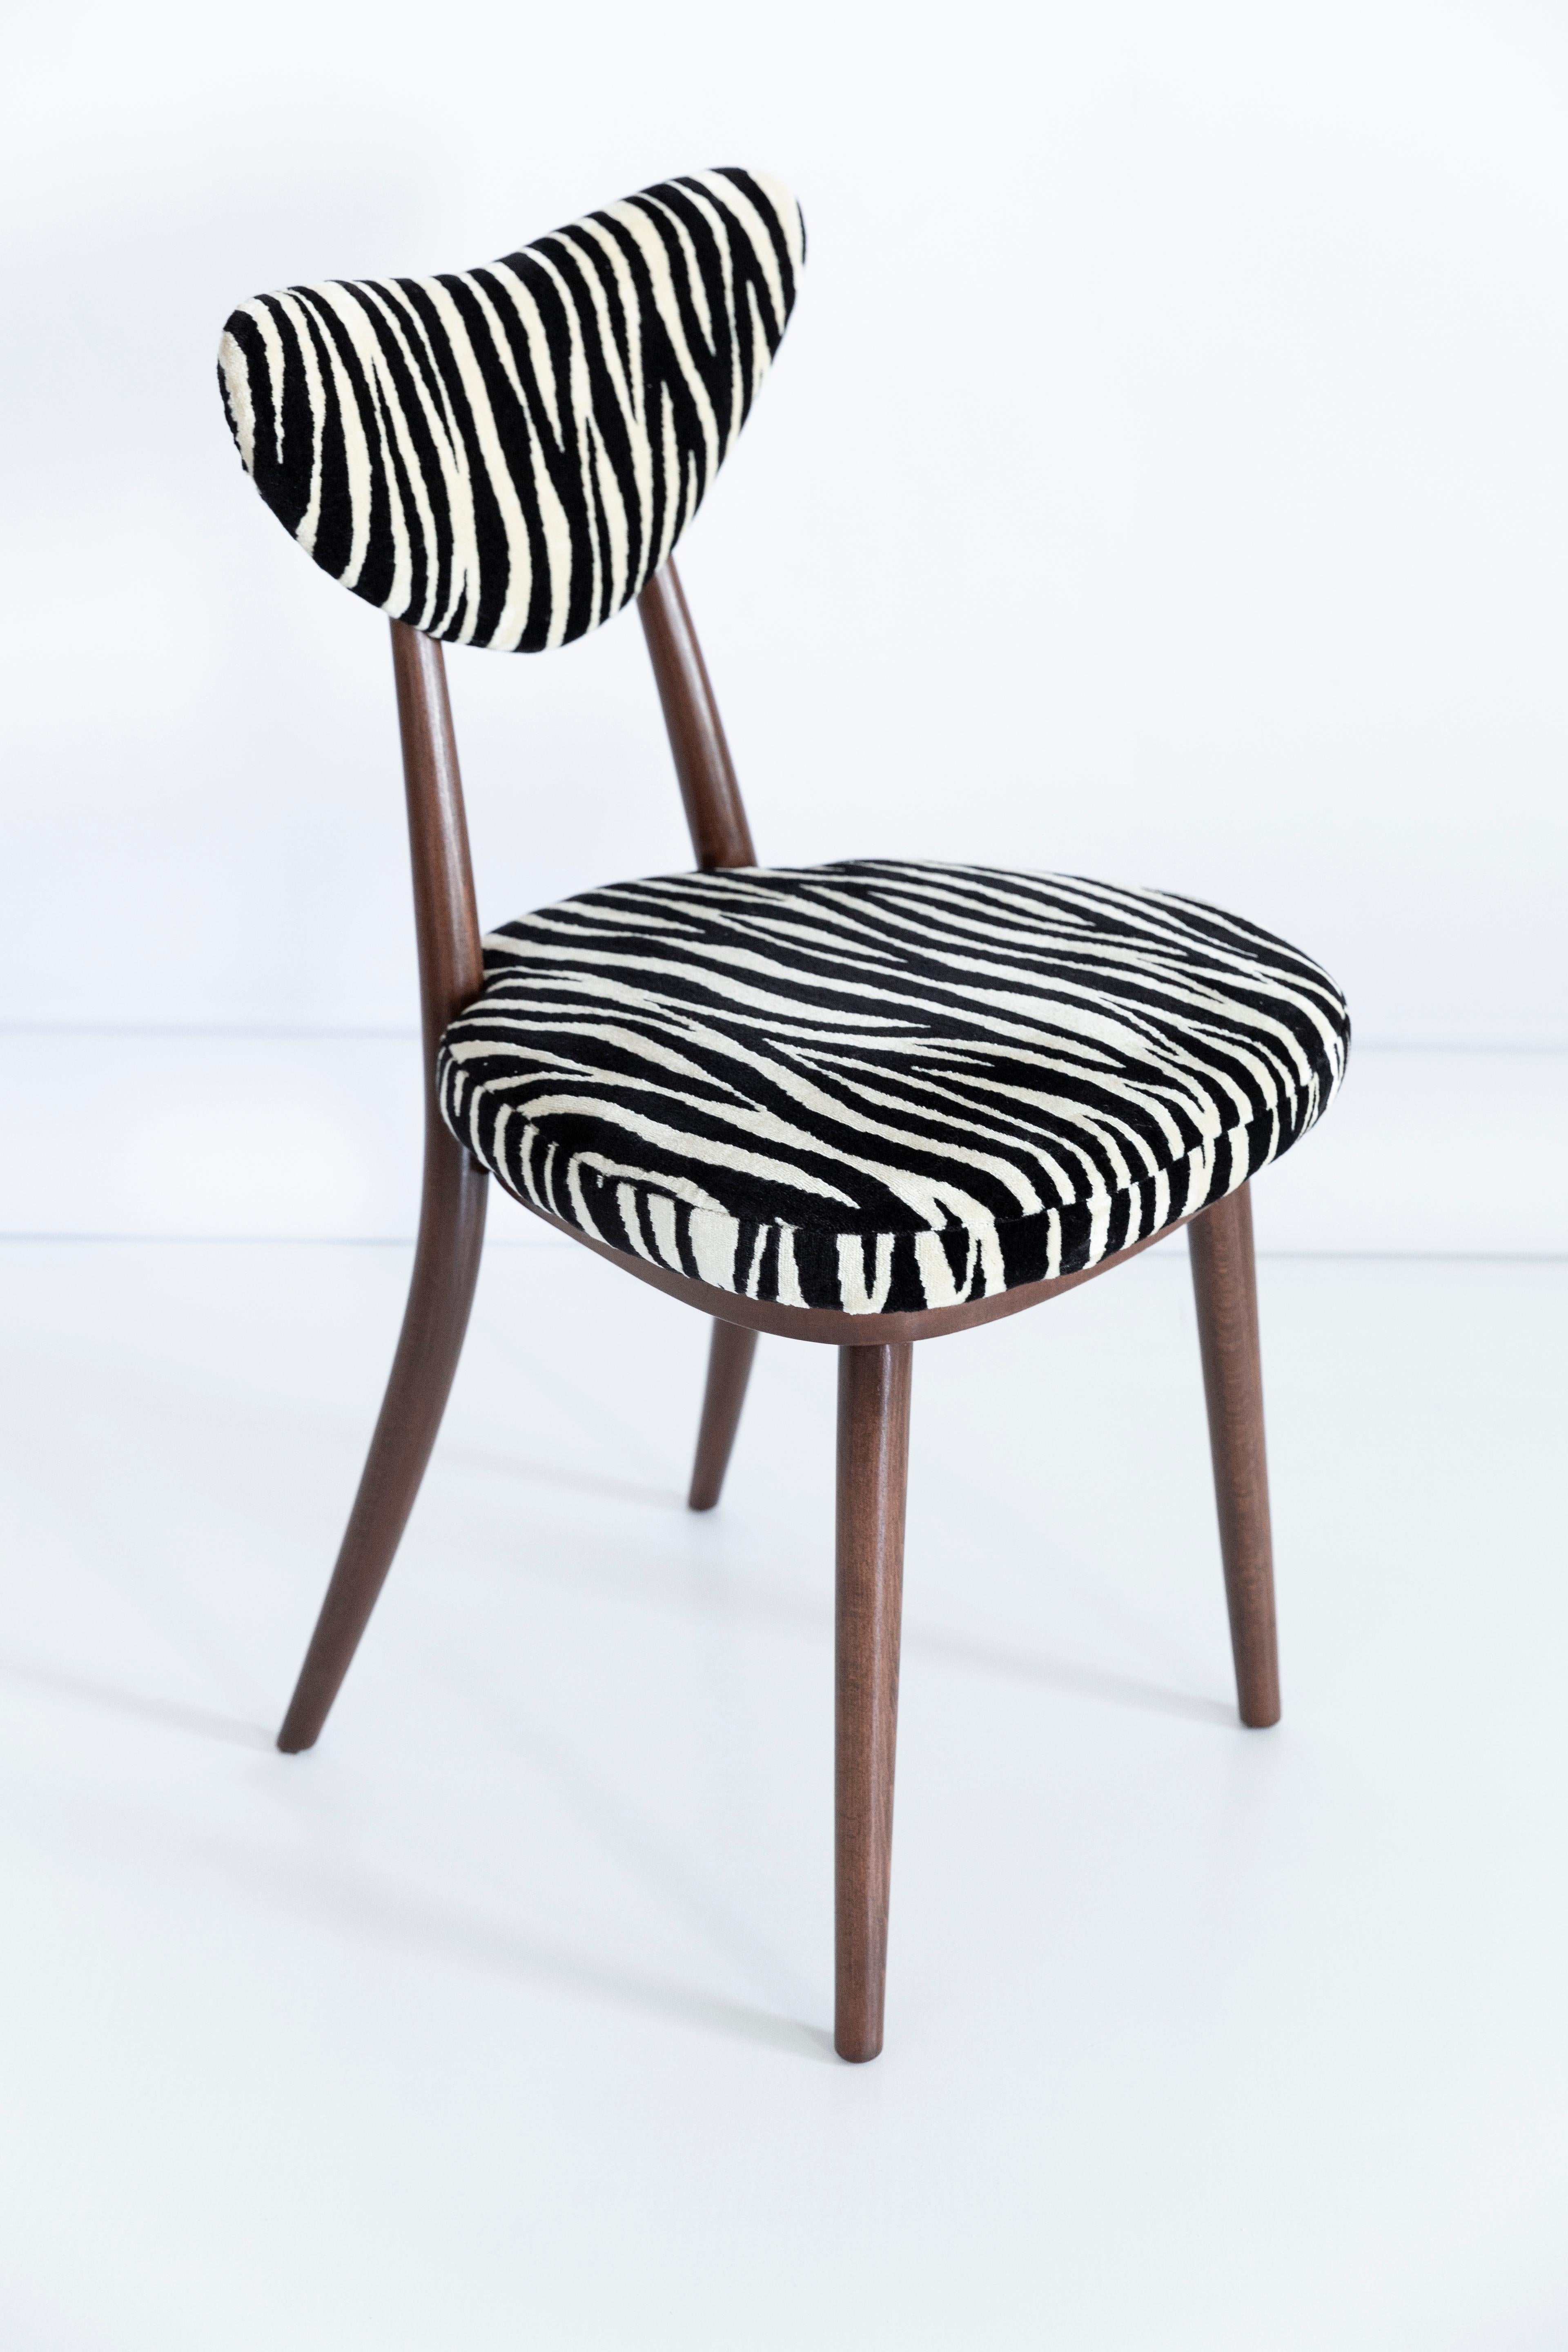 Set of Six Midcentury Zebra Black and White Heart Chairs, Poland, 1960s For Sale 3